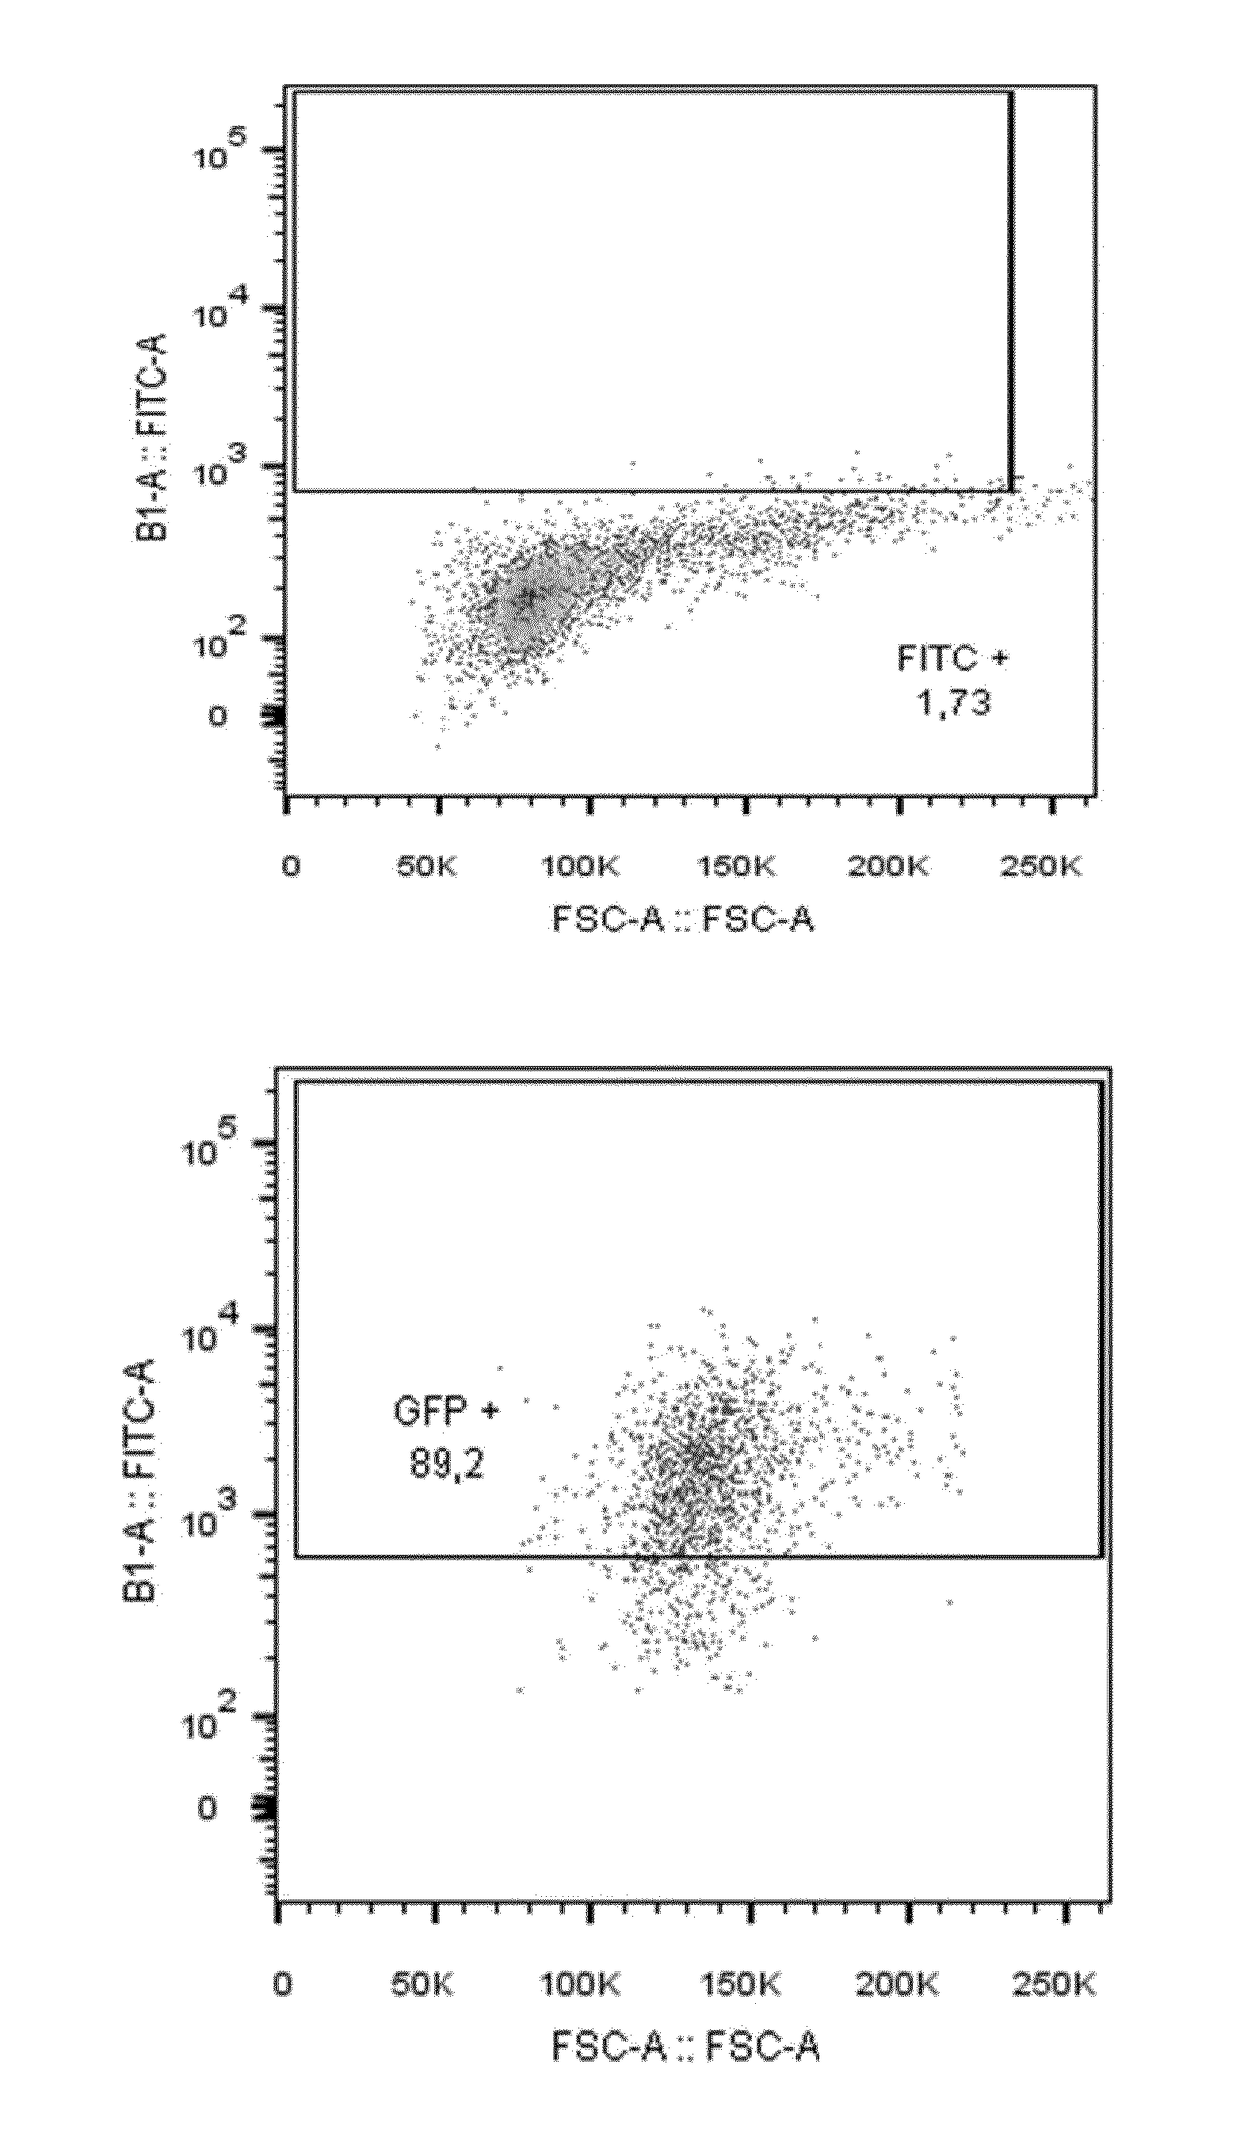 Methods for improving functionality in nk cell by gene inactivation using specific endonuclease